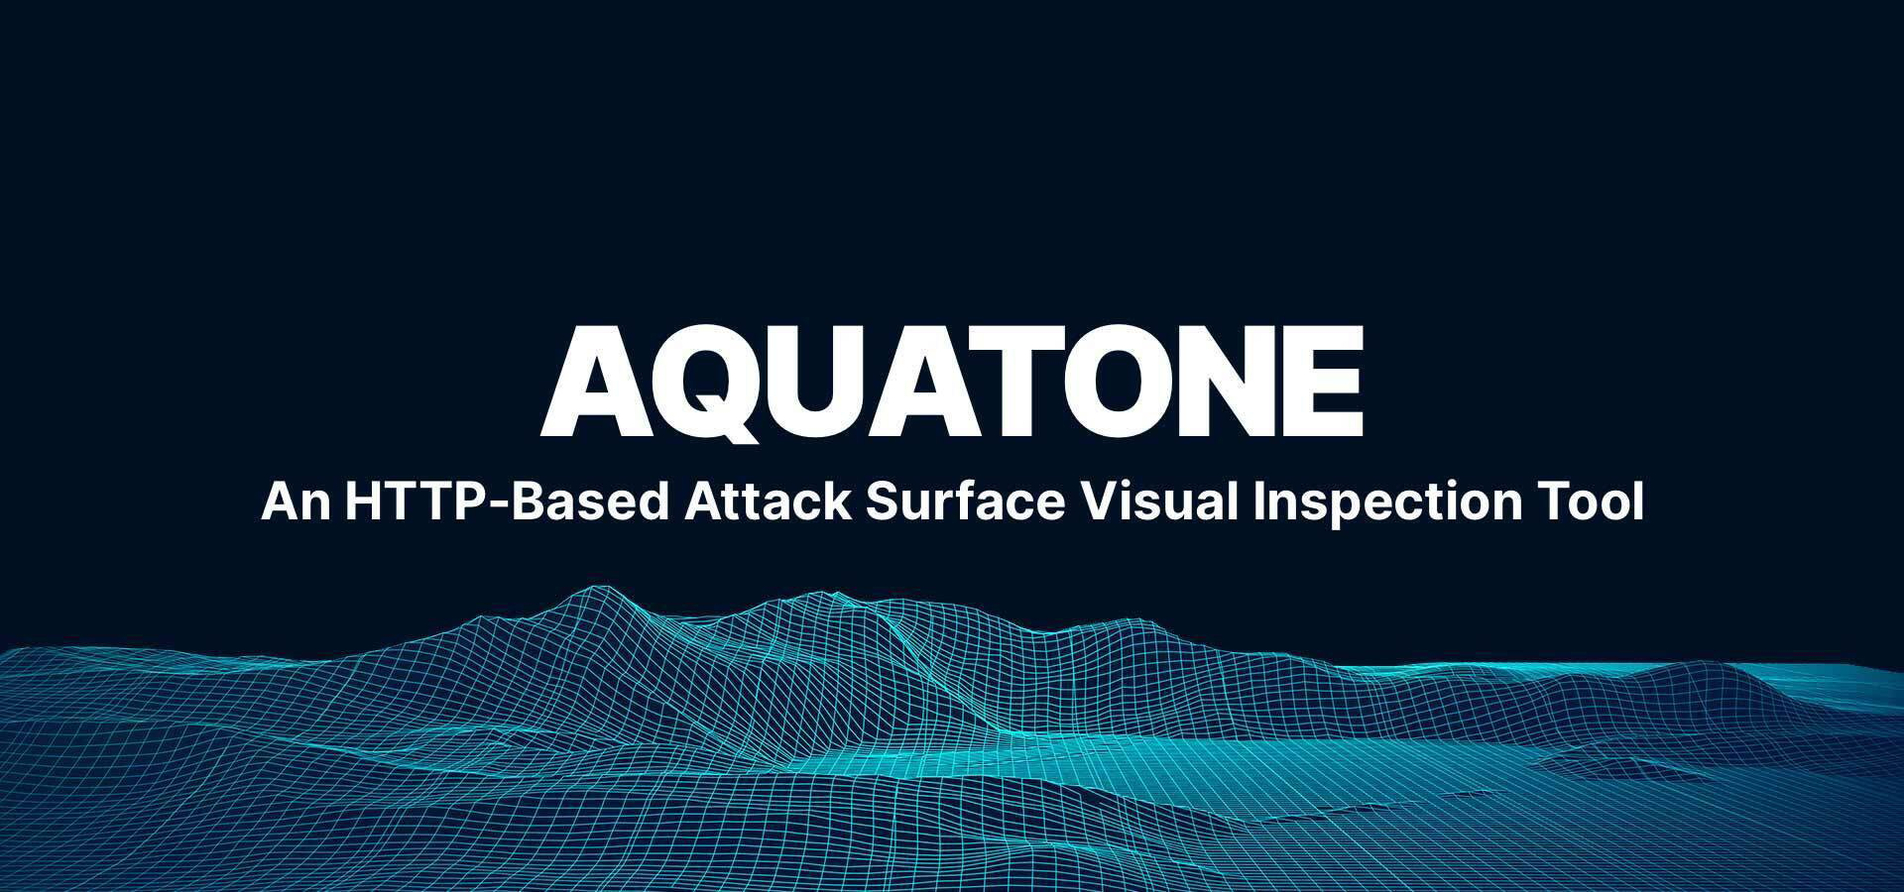 Aquatone: An HTTP-Based Attack Surface Visual Inspection Tool.